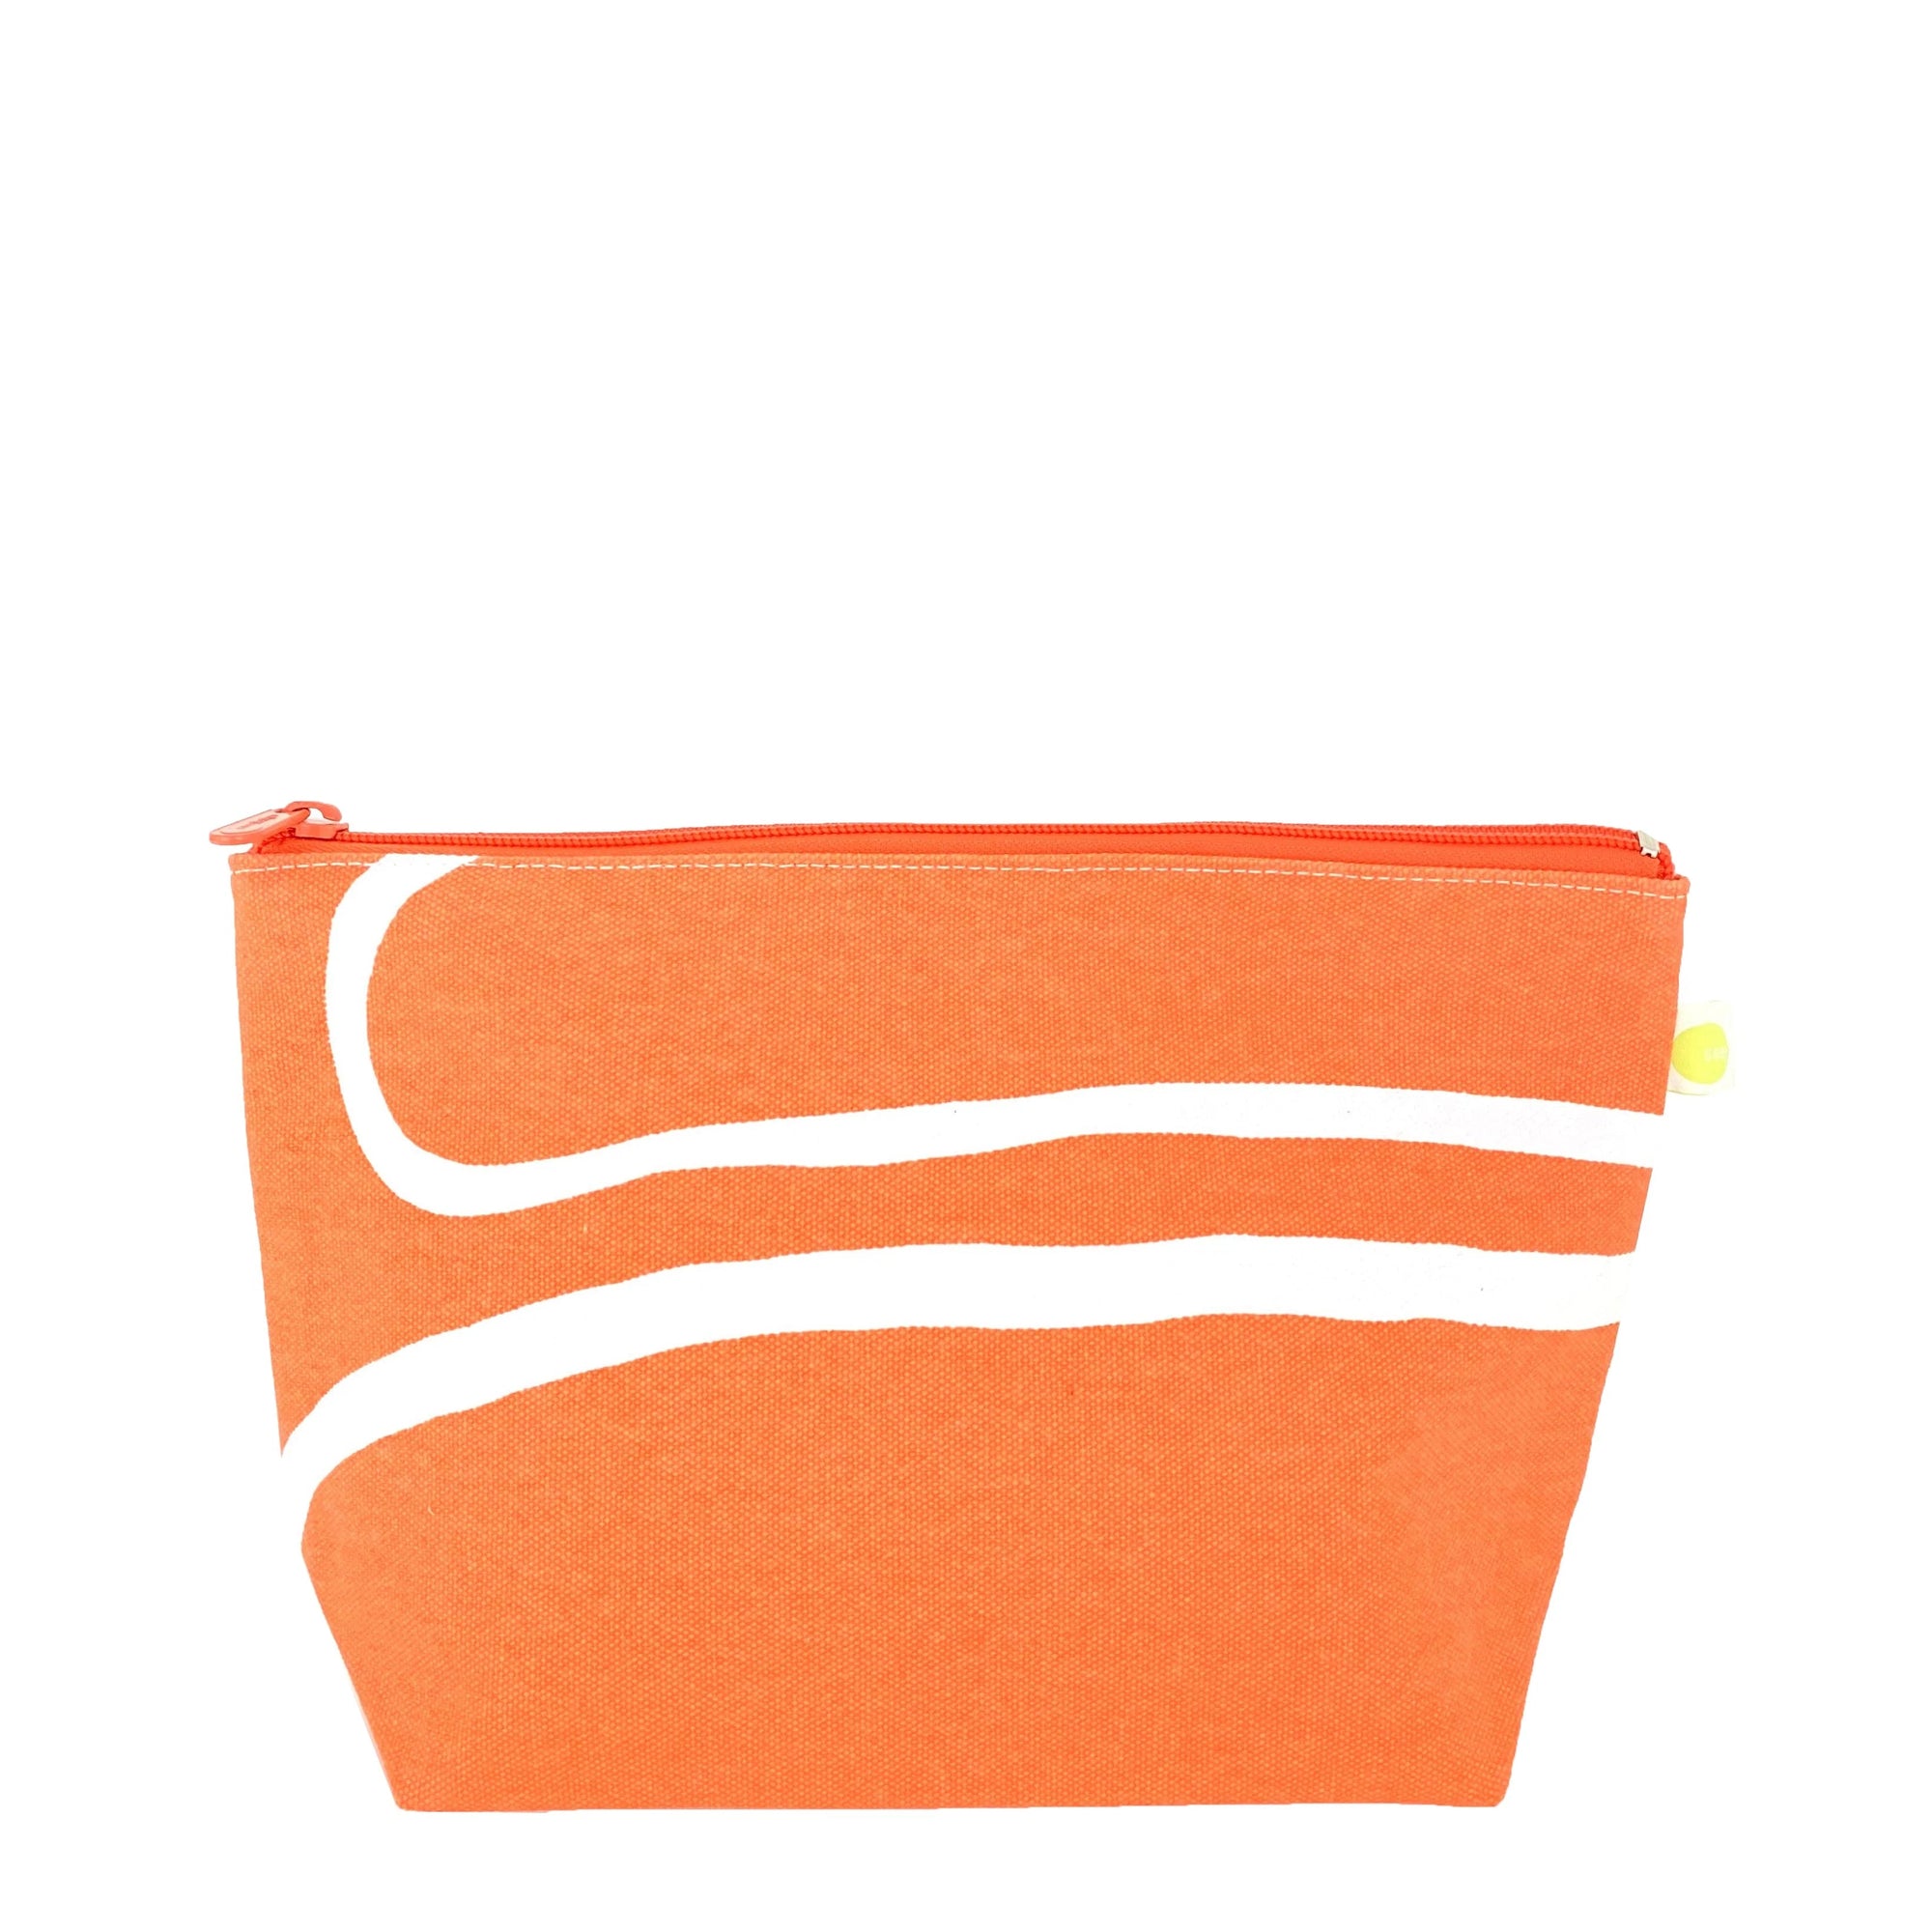 LARGE LOOPY TRAVEL POUCH - MELON-Case-SEE DESIGN-Coriander